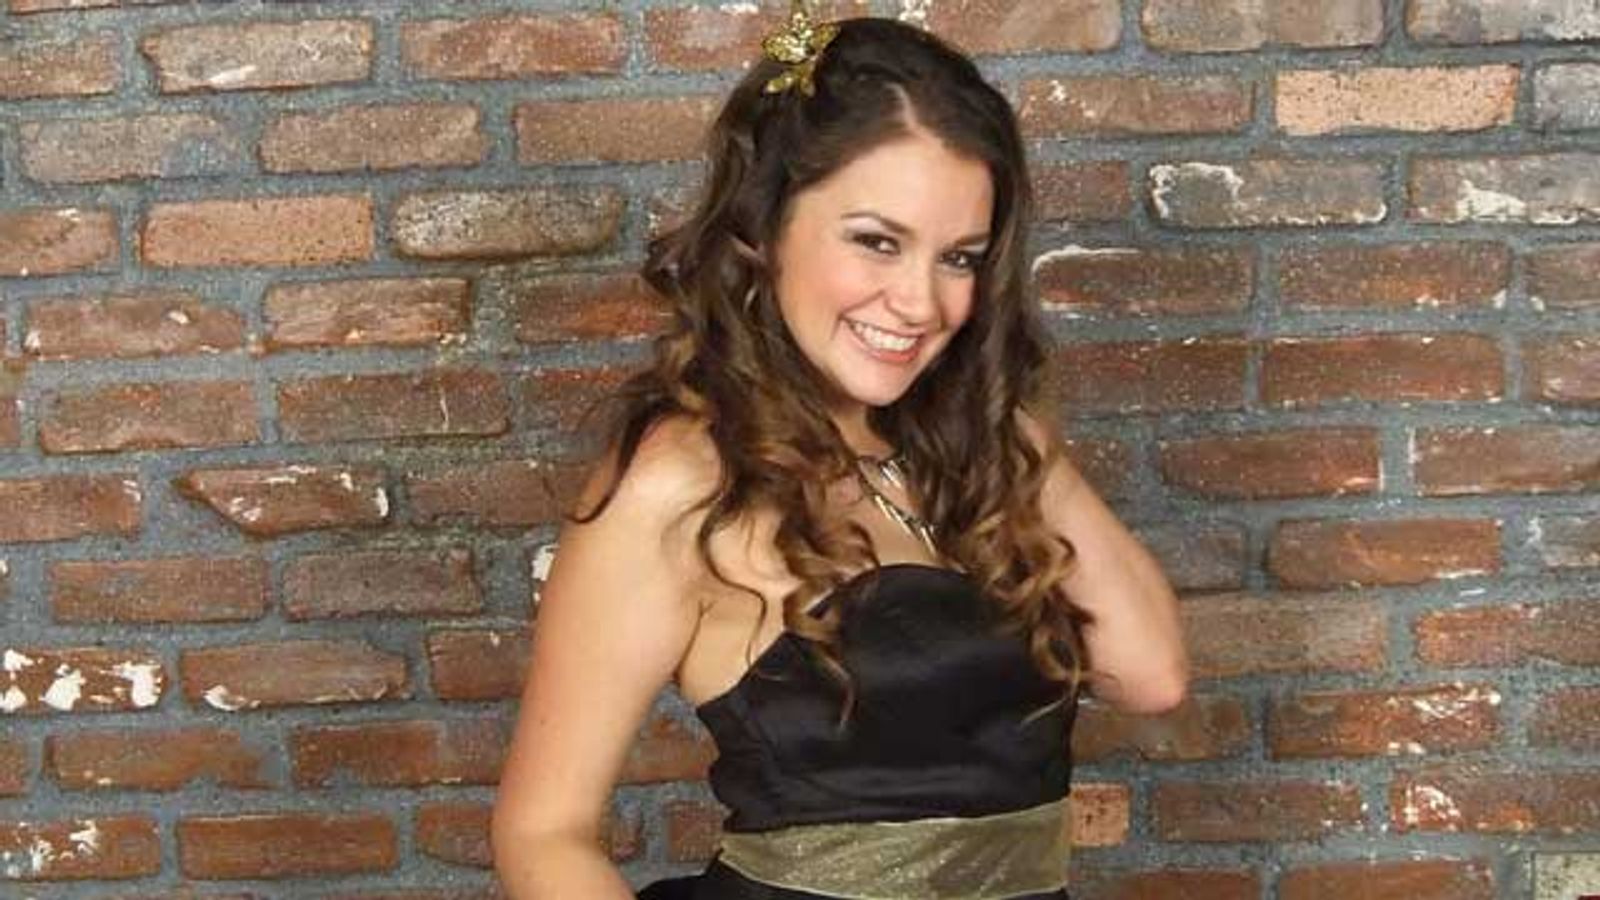 Allie Haze Set to Heat Up Winter with Sizzling Feature Dance Tour